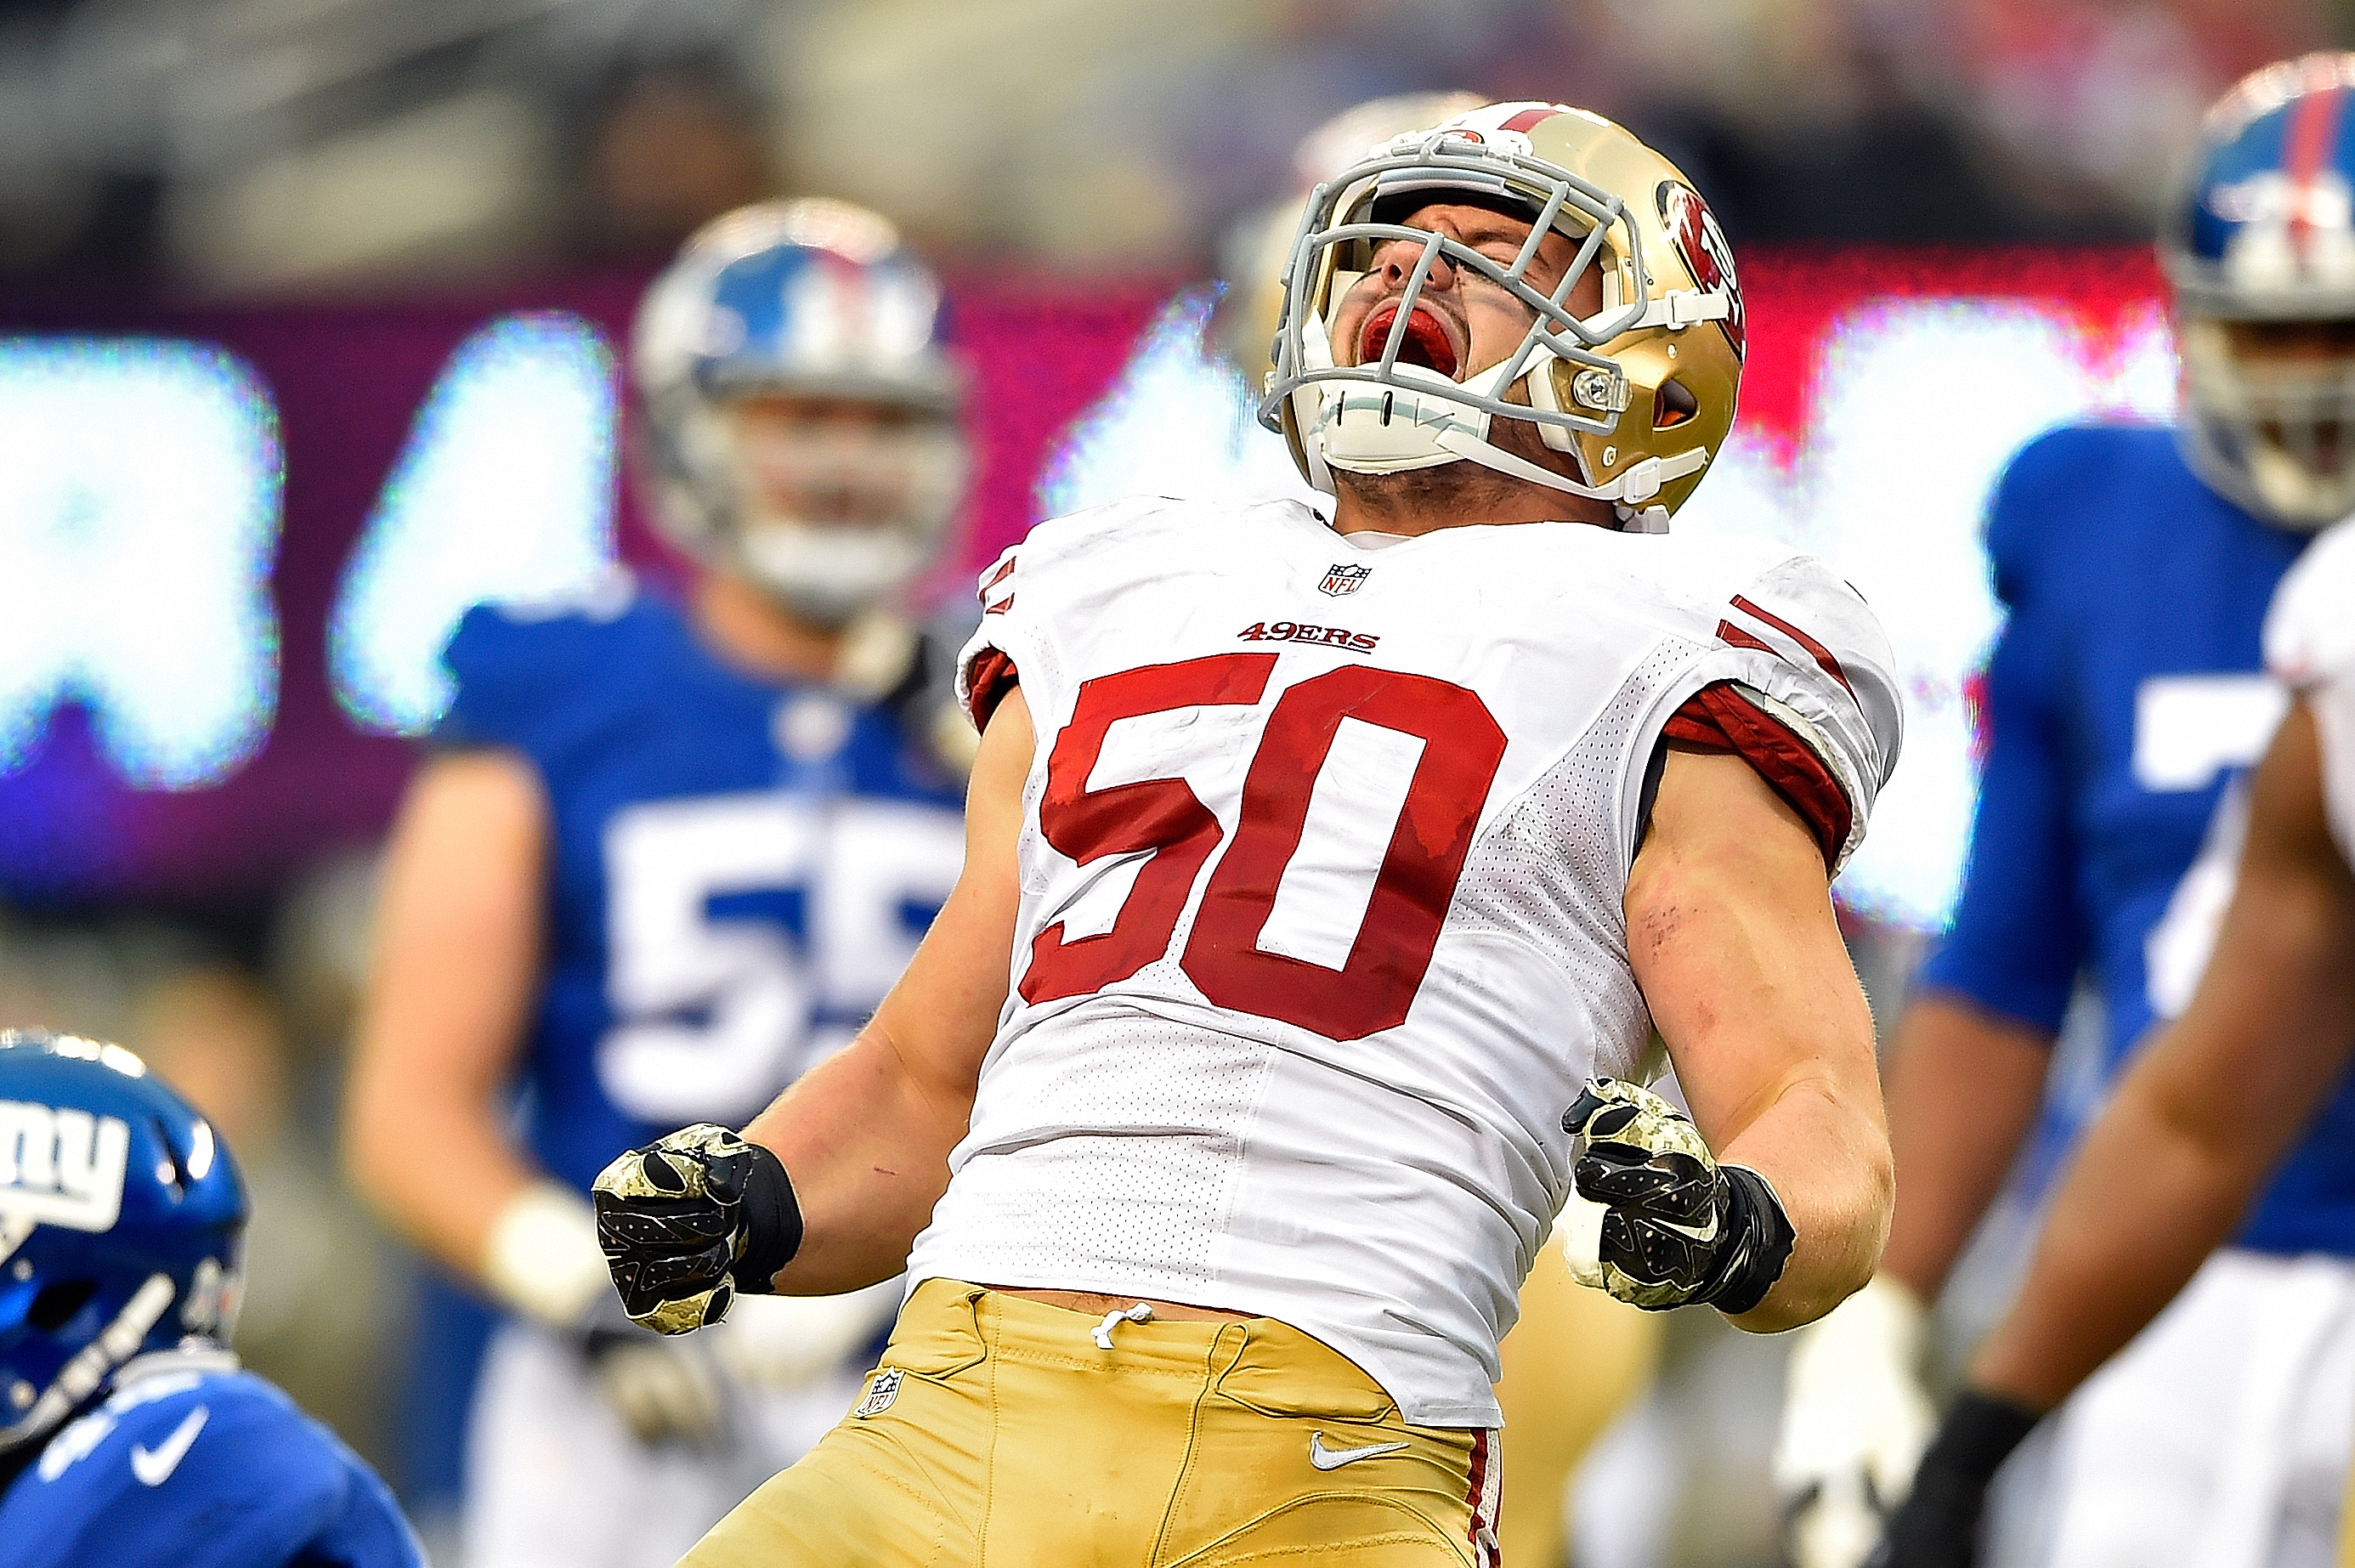 Chris Borland Gave up NFL Fame and Fortune to Help Those in Need